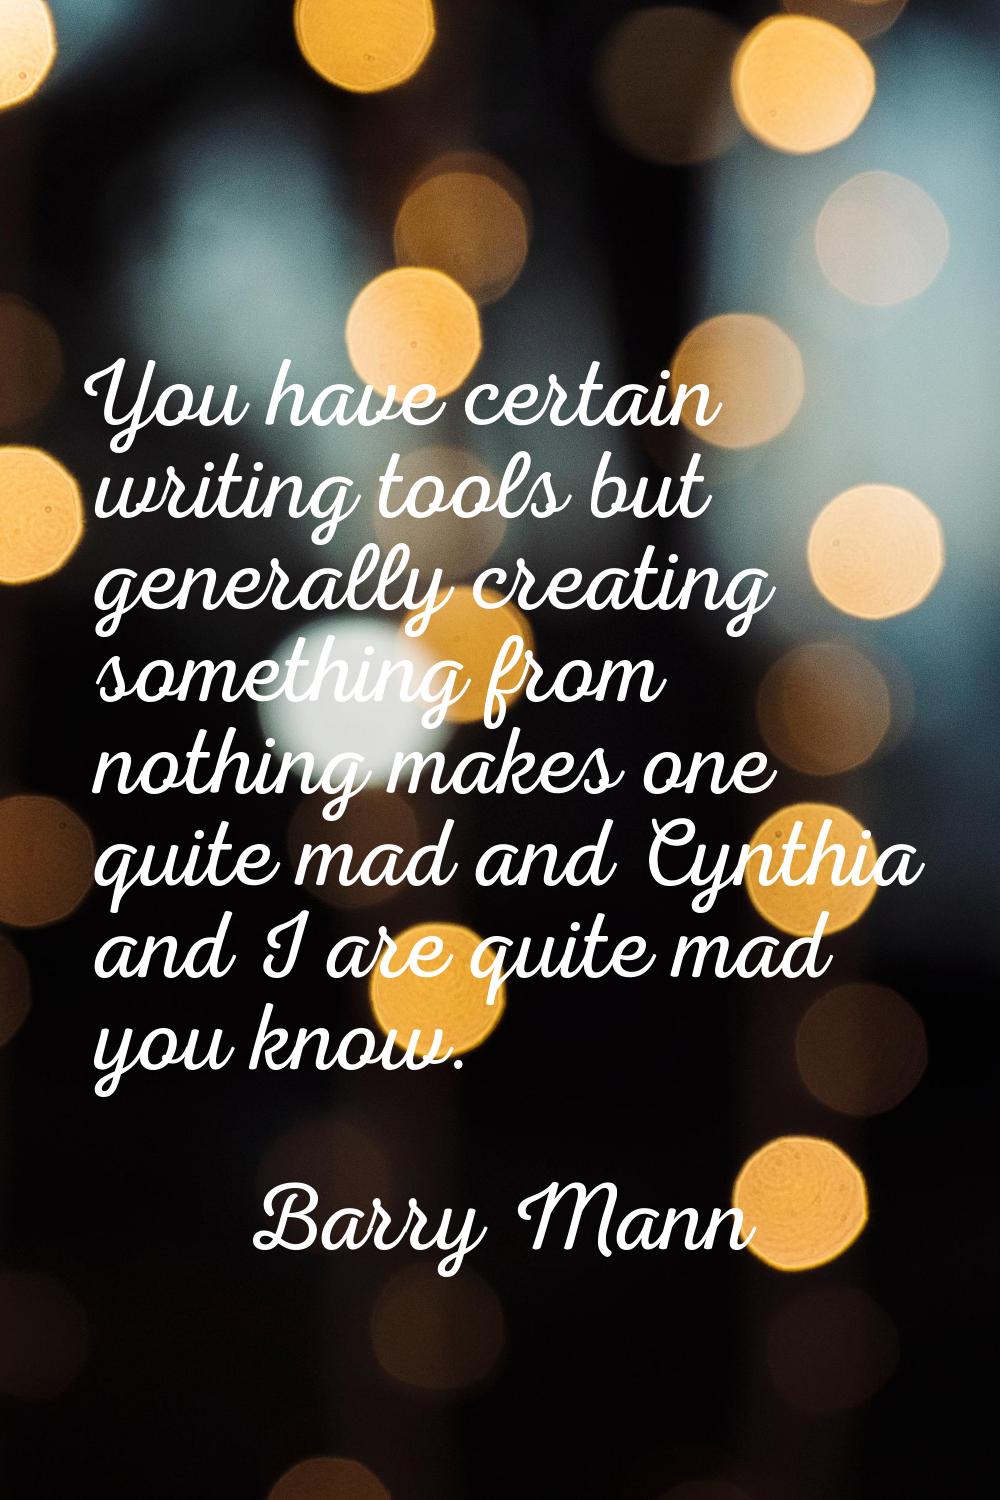 You have certain writing tools but generally creating something from nothing makes one quite mad an